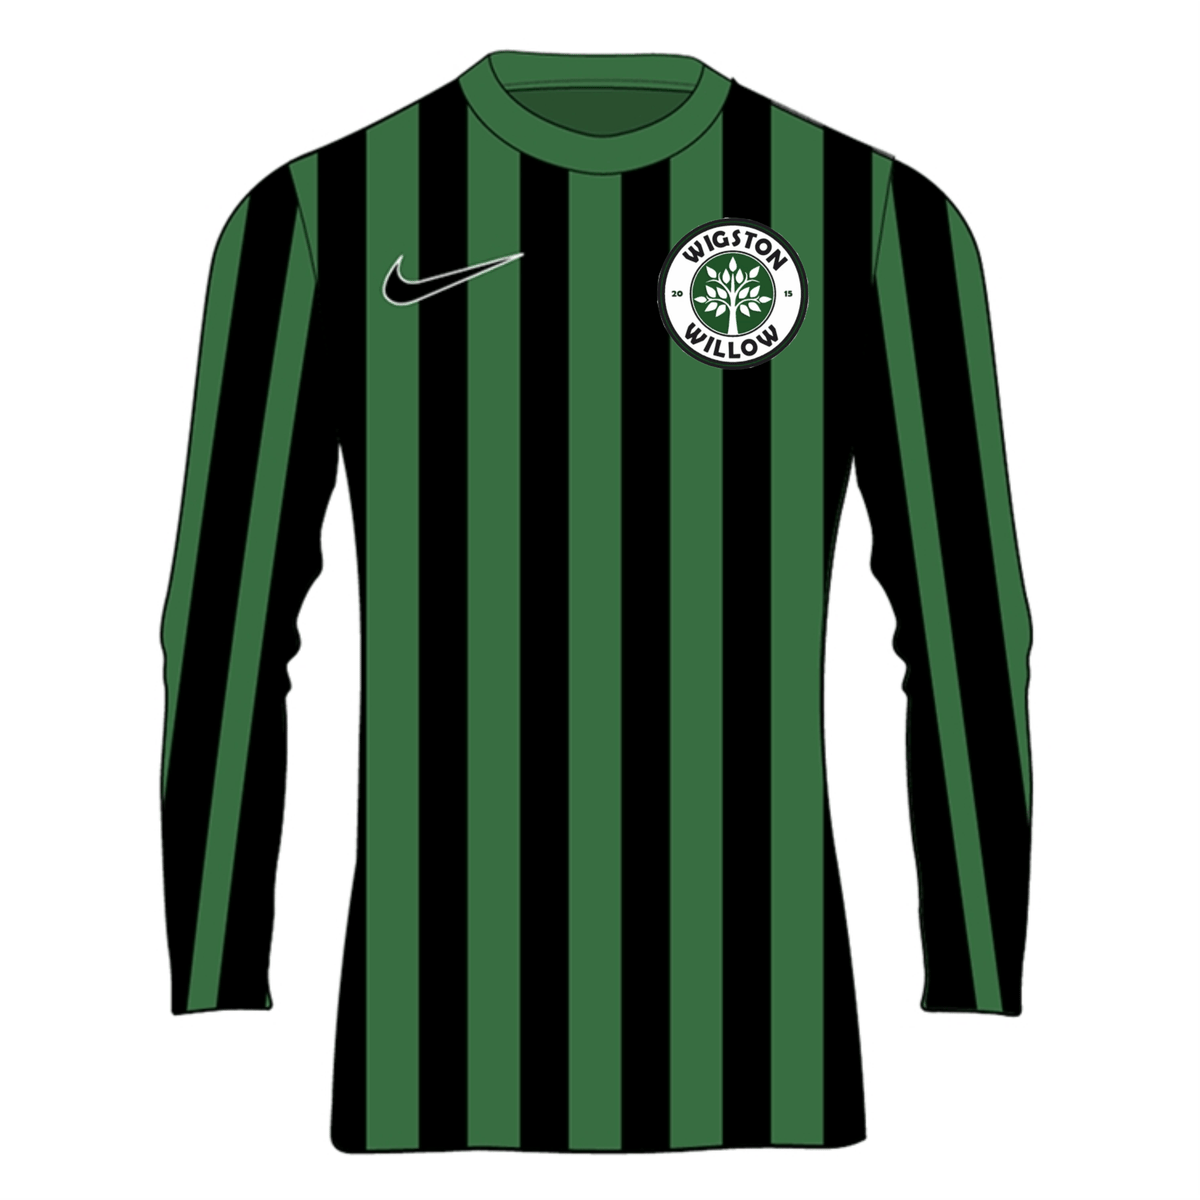 Wigston Willow FC - Striped Divison IV Jersey (Youth, Long Sleeve)